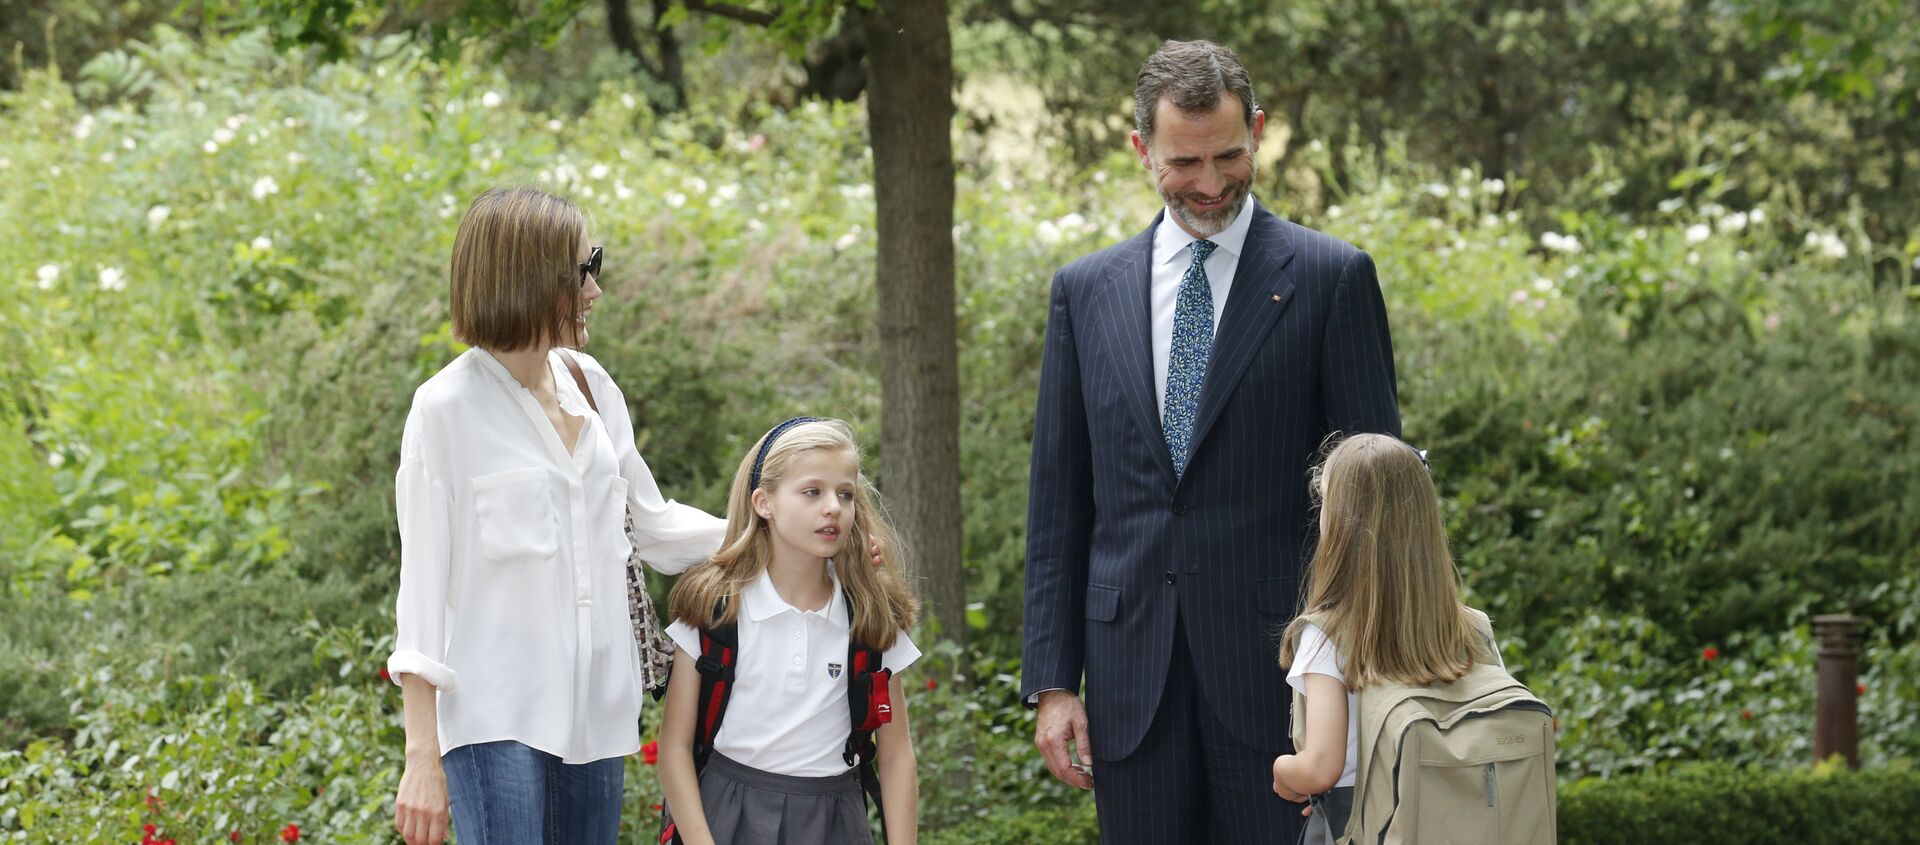 Spain's King Felipe (2nd R), Queen Letizia (L) and their daughters Infanta Leonor and Sofia (R) walk at Zarzuela Palace in Madrid, Spain, in this May 14, 2015 - Sputnik Mundo, 1920, 29.01.2021